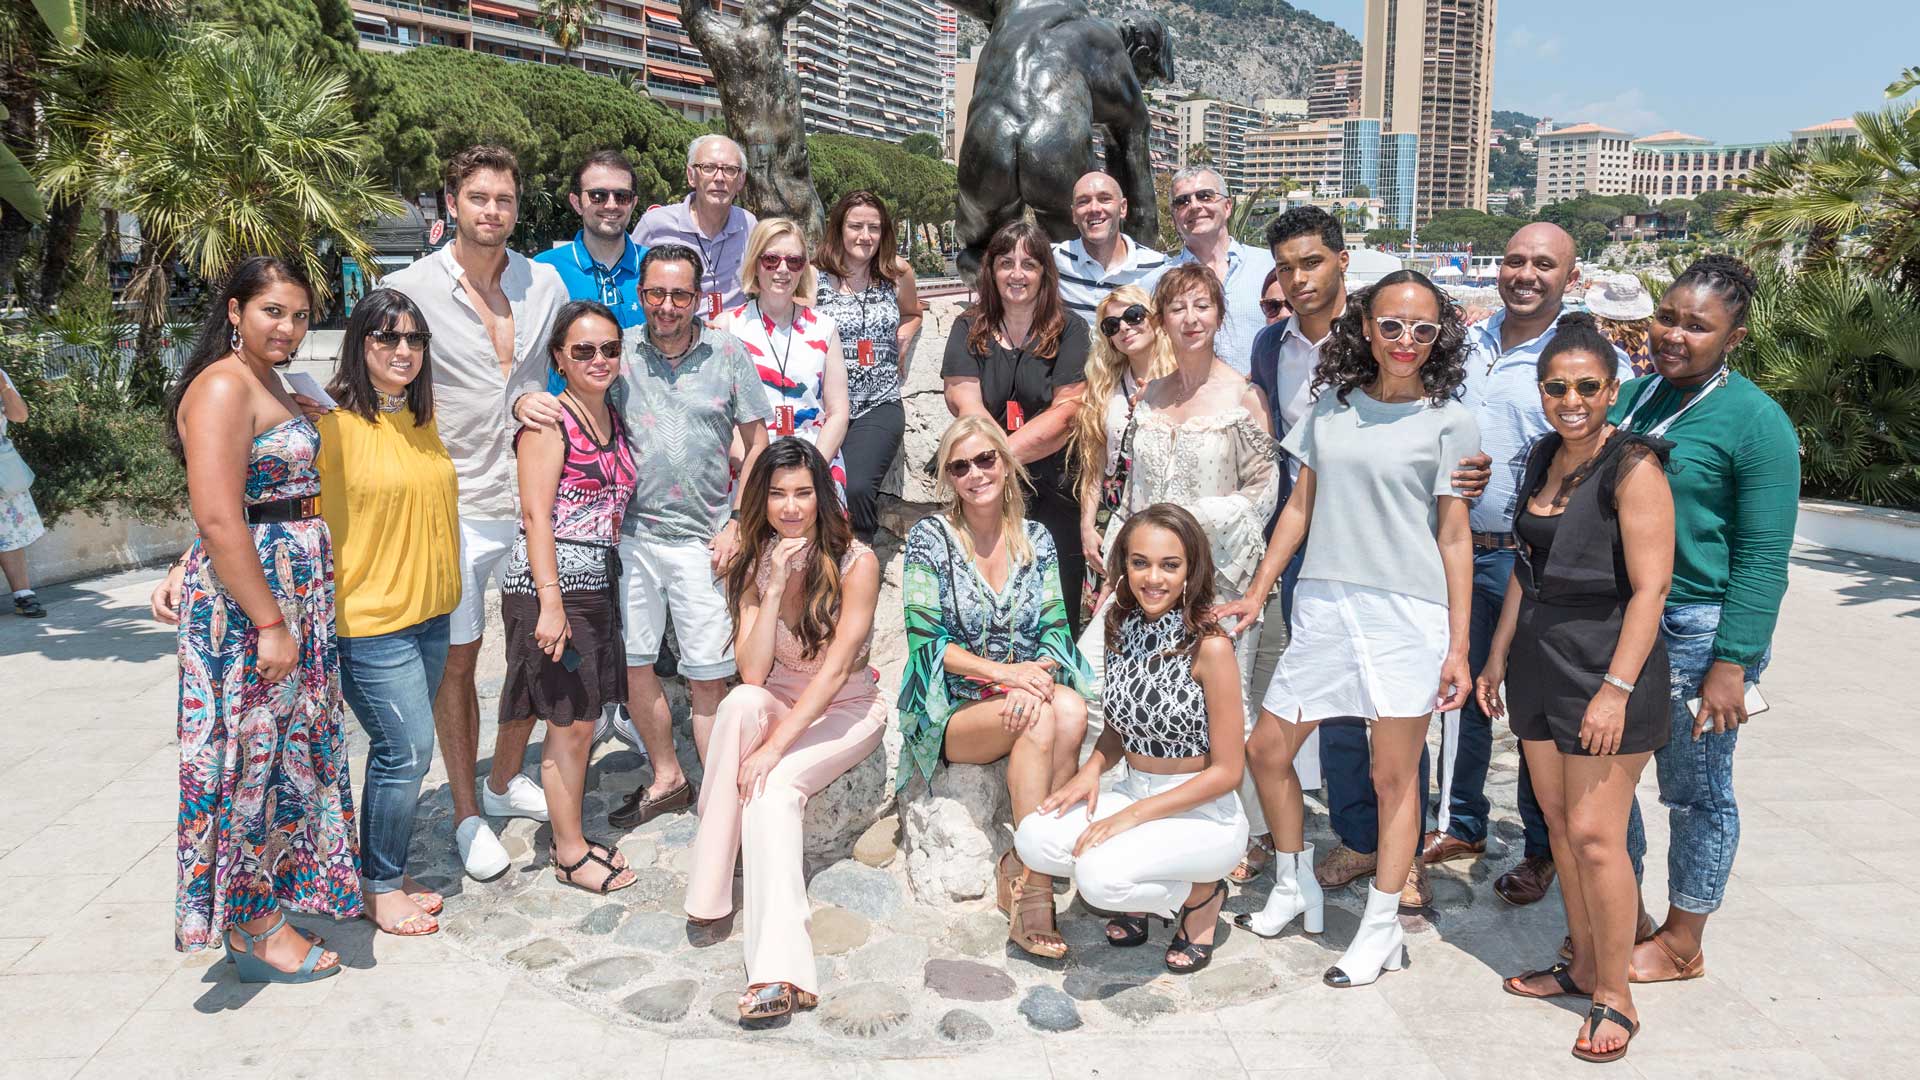 The cast of B&B hit the beautiful beaches of the French Riviera.